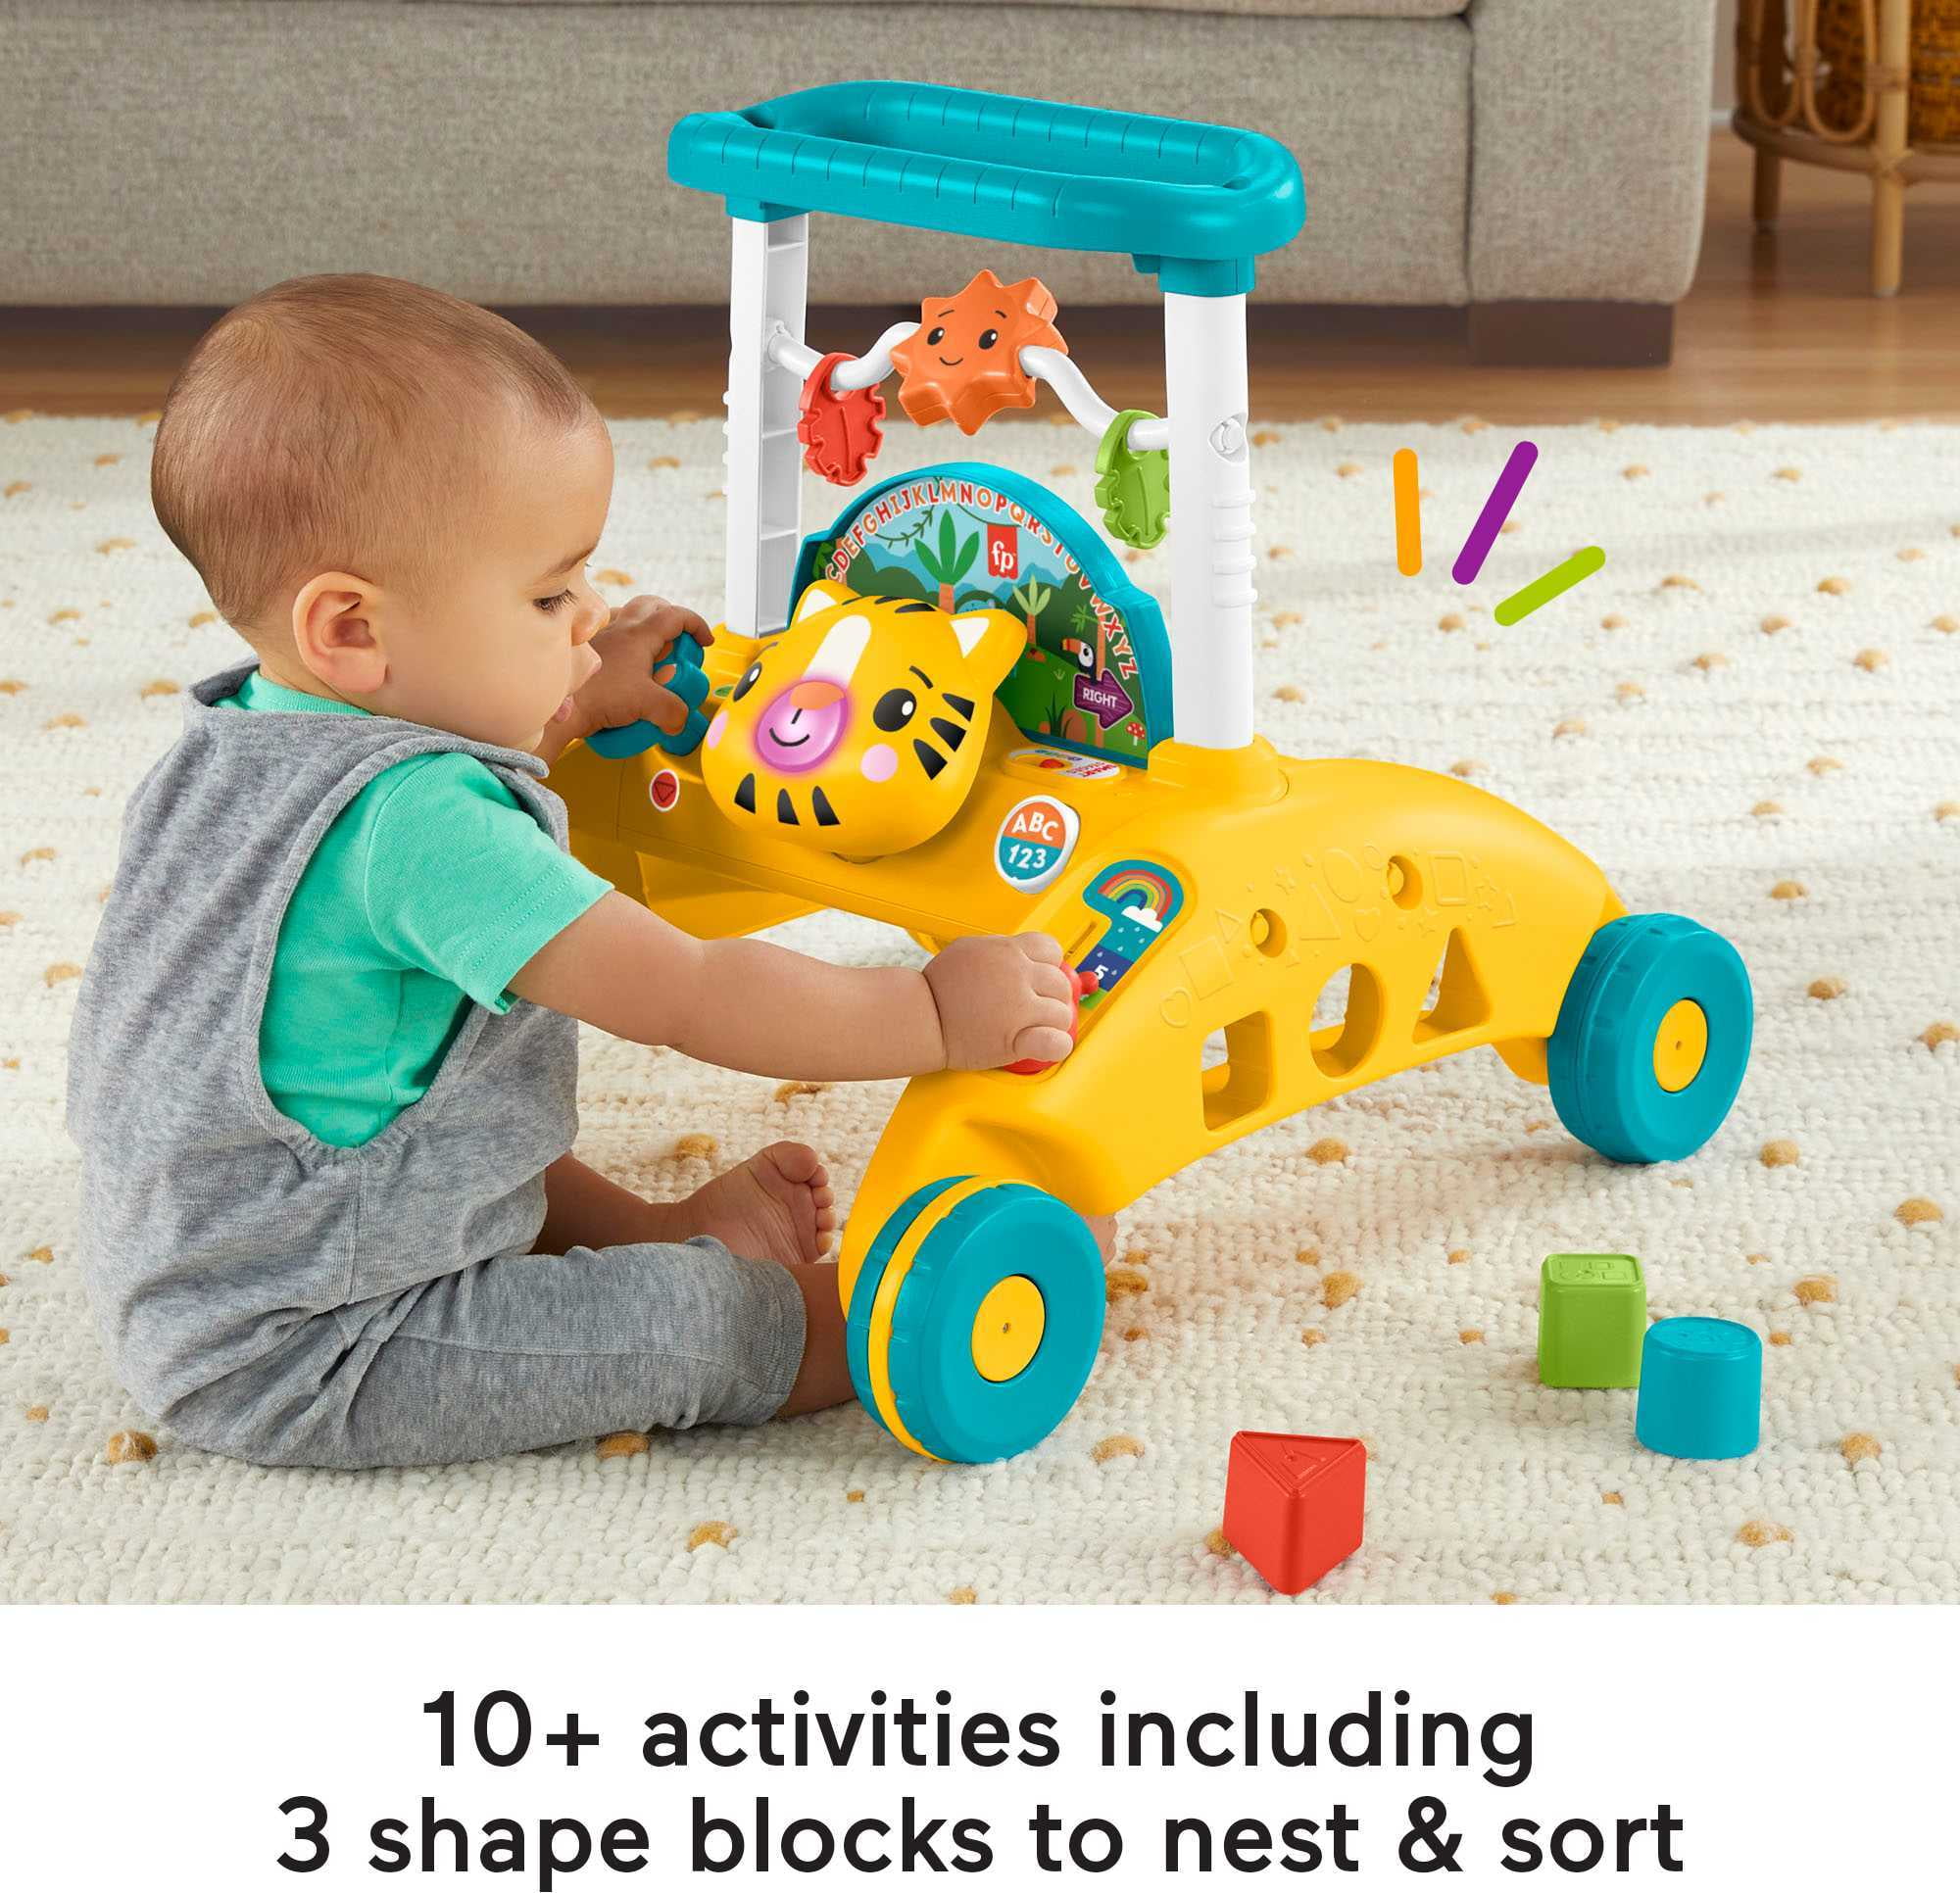 Fisher-Price 2-Sided Steady Speed Tiger Walker, Baby Learning Toy - 3